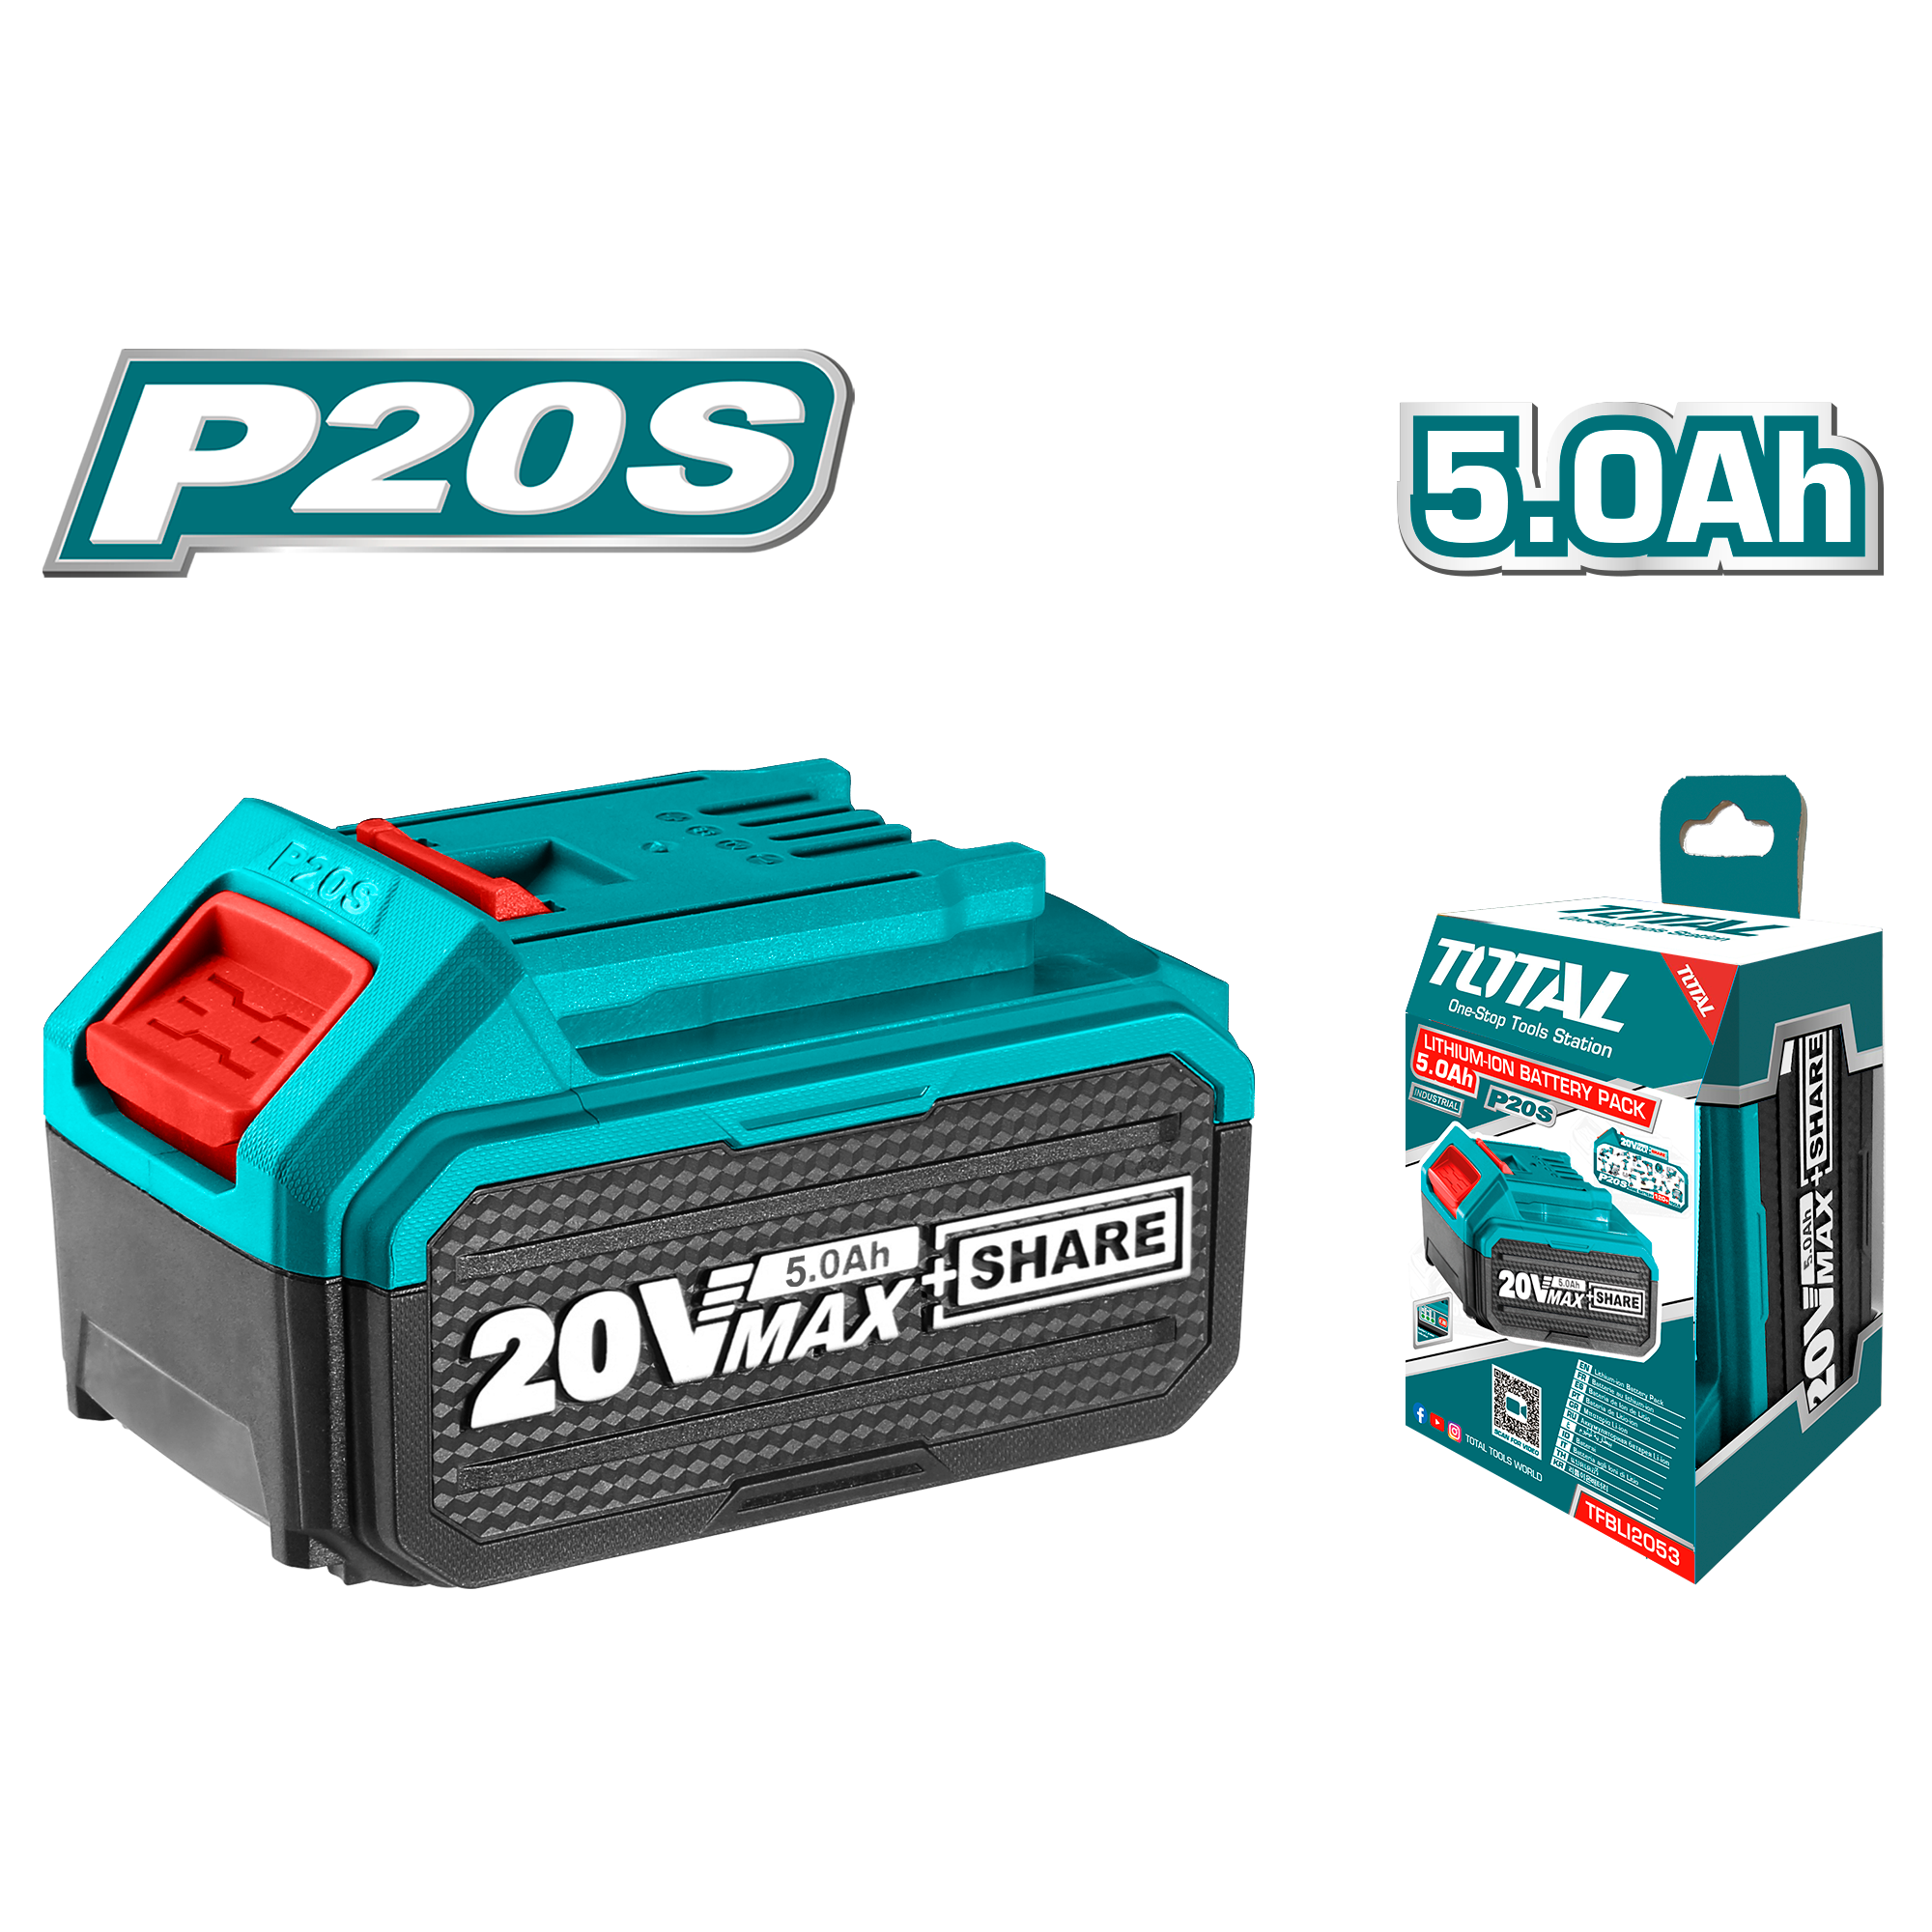 TOTAL TOOLS LITHIUM-ION BATTERY PACK 5.0AH TOTAL TOOLS NAMIBIA